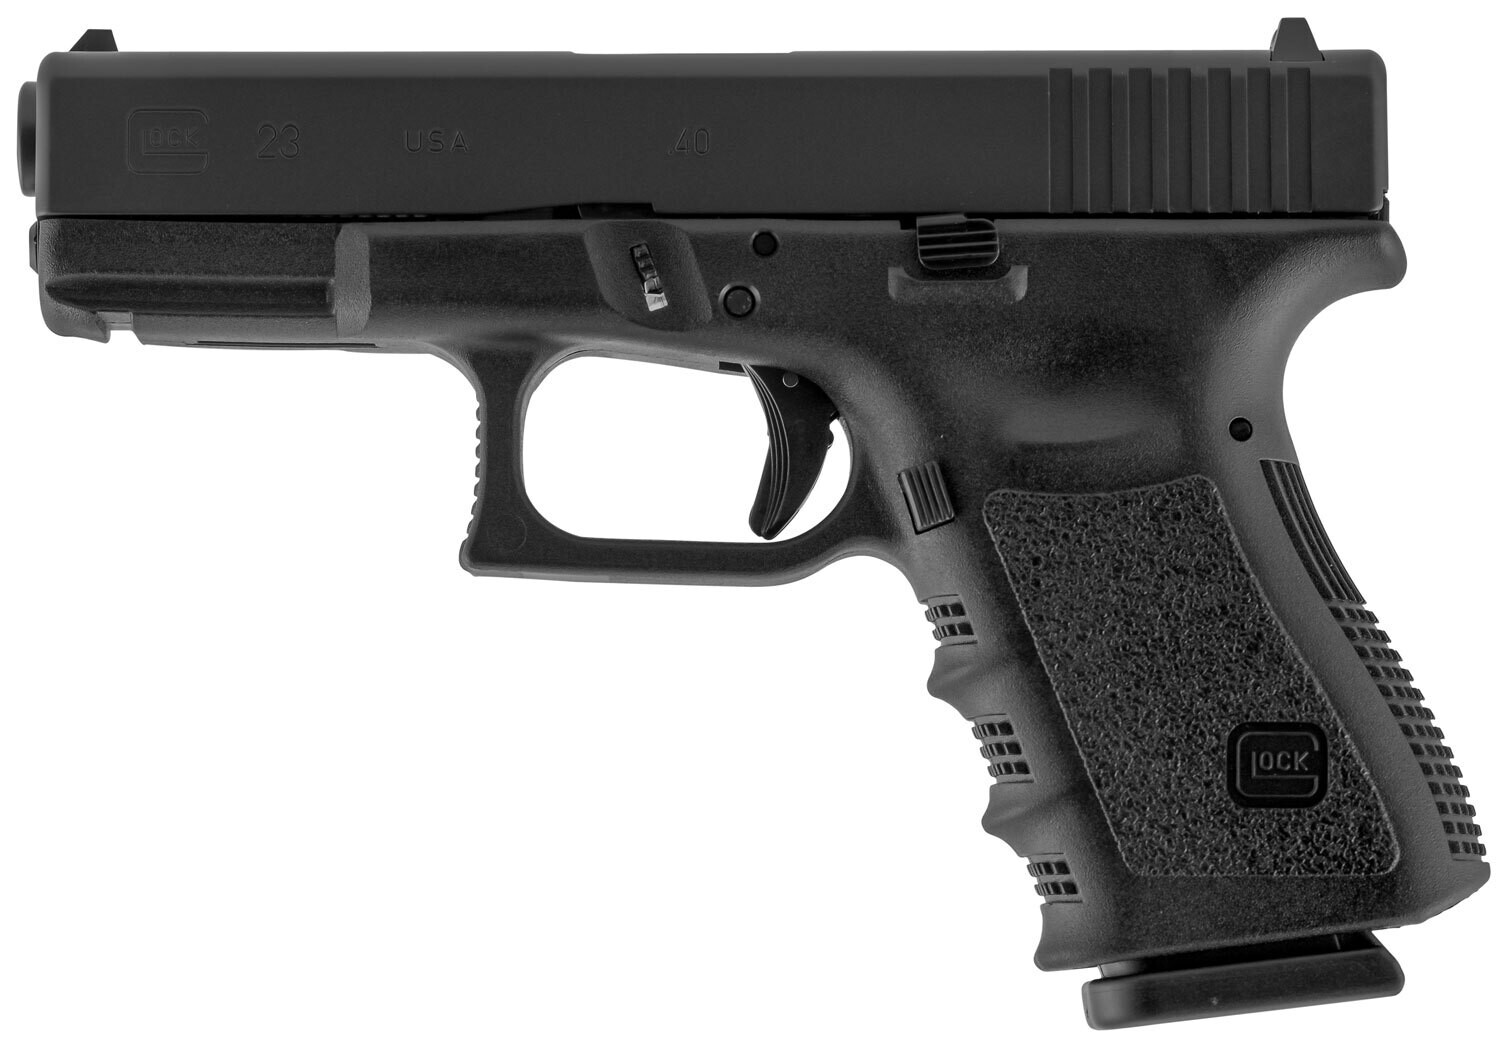 Glock OEM G23 - Pistol Parts Pack 40 S&W - Fits: Polymer80 PF940C - Black - FRAME NOT INCLUDED